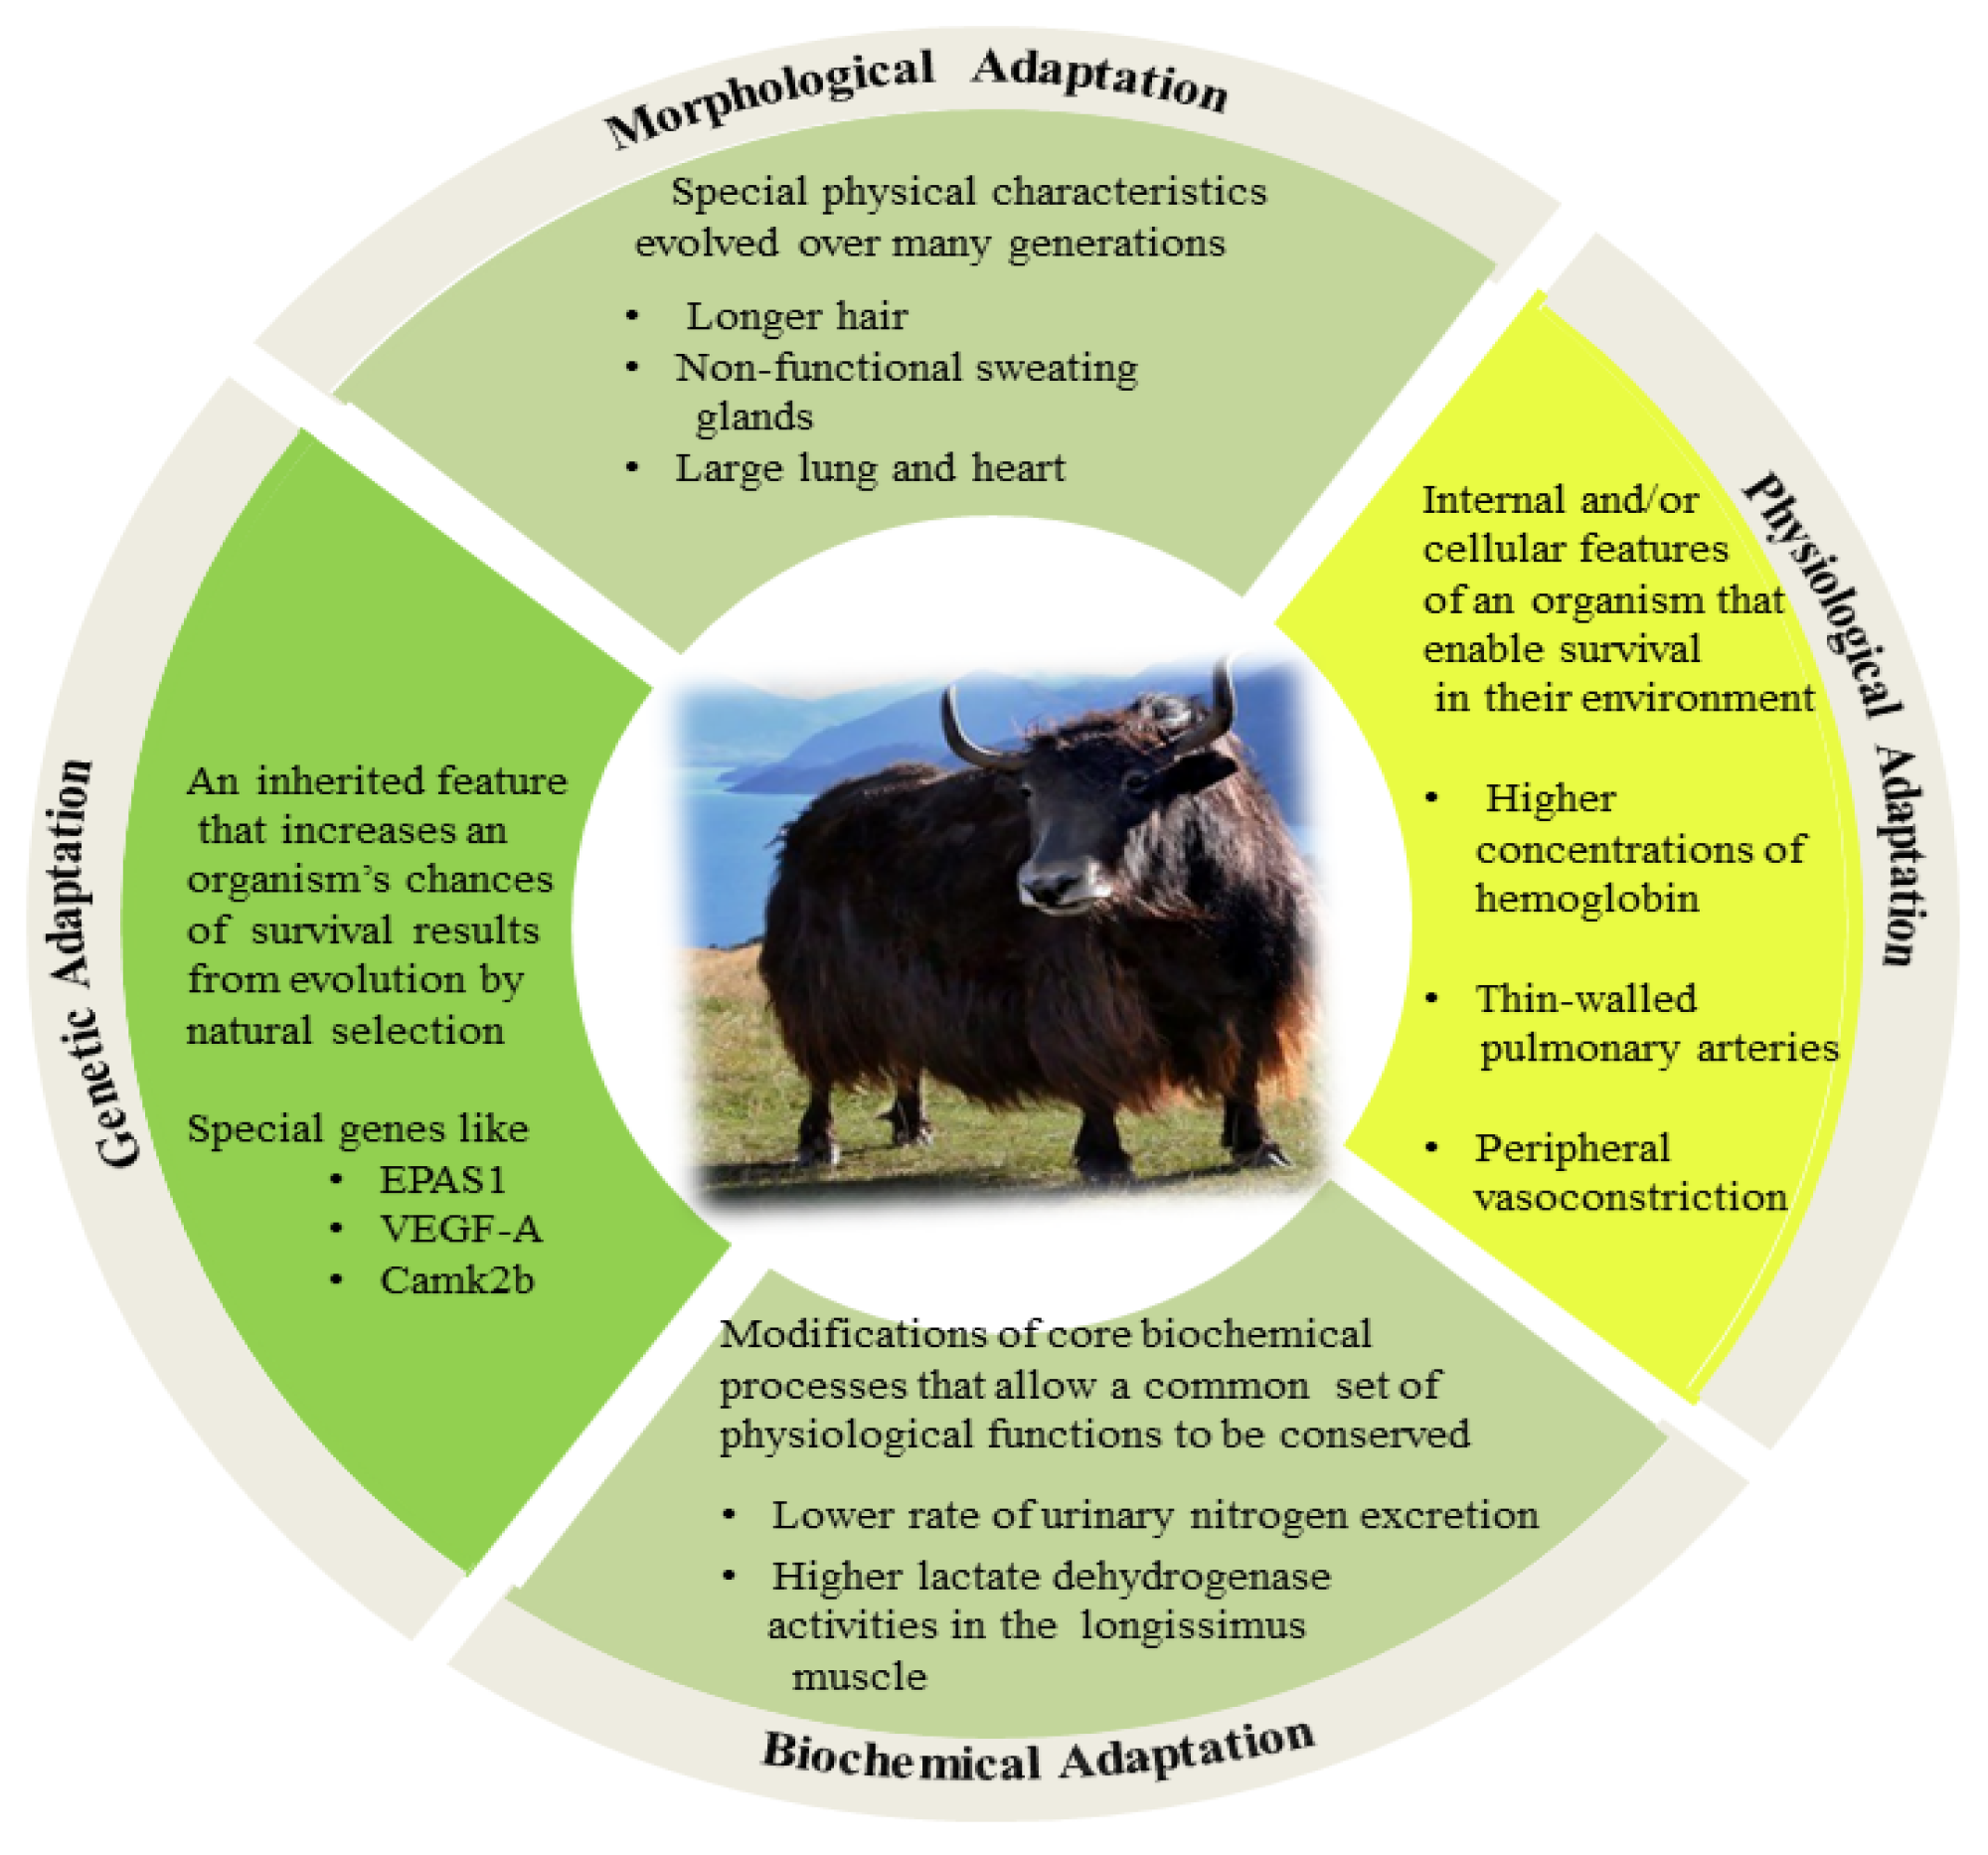 IV. The Significance of Foraging Behavior in Animal Survival